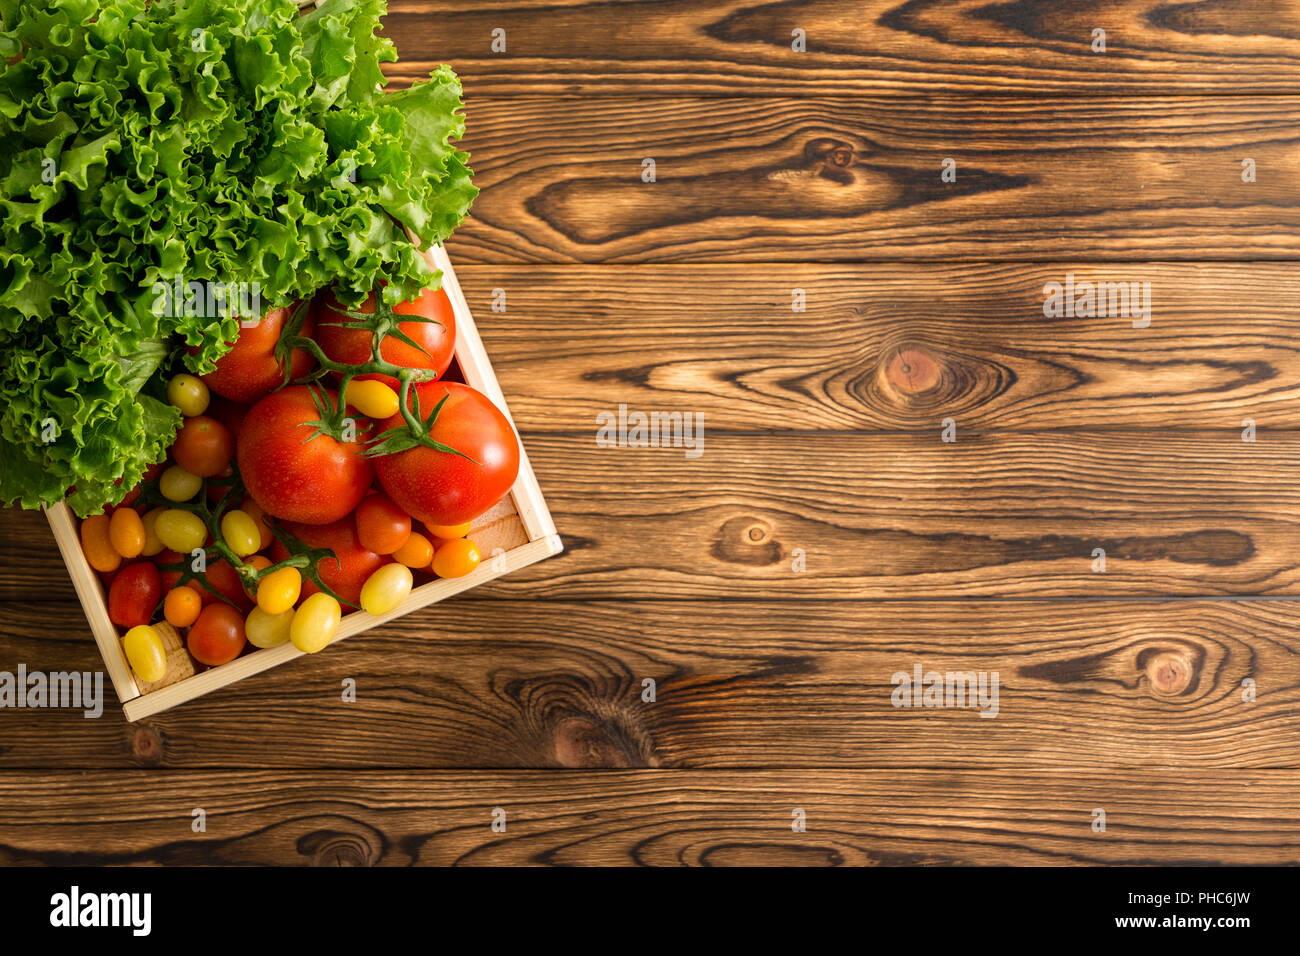 Assortment of ripe whole tomatoes and head of fresh green lettuce in a small wooden box on a table wooden table at an organic farmers market viewed fr Stock Photo